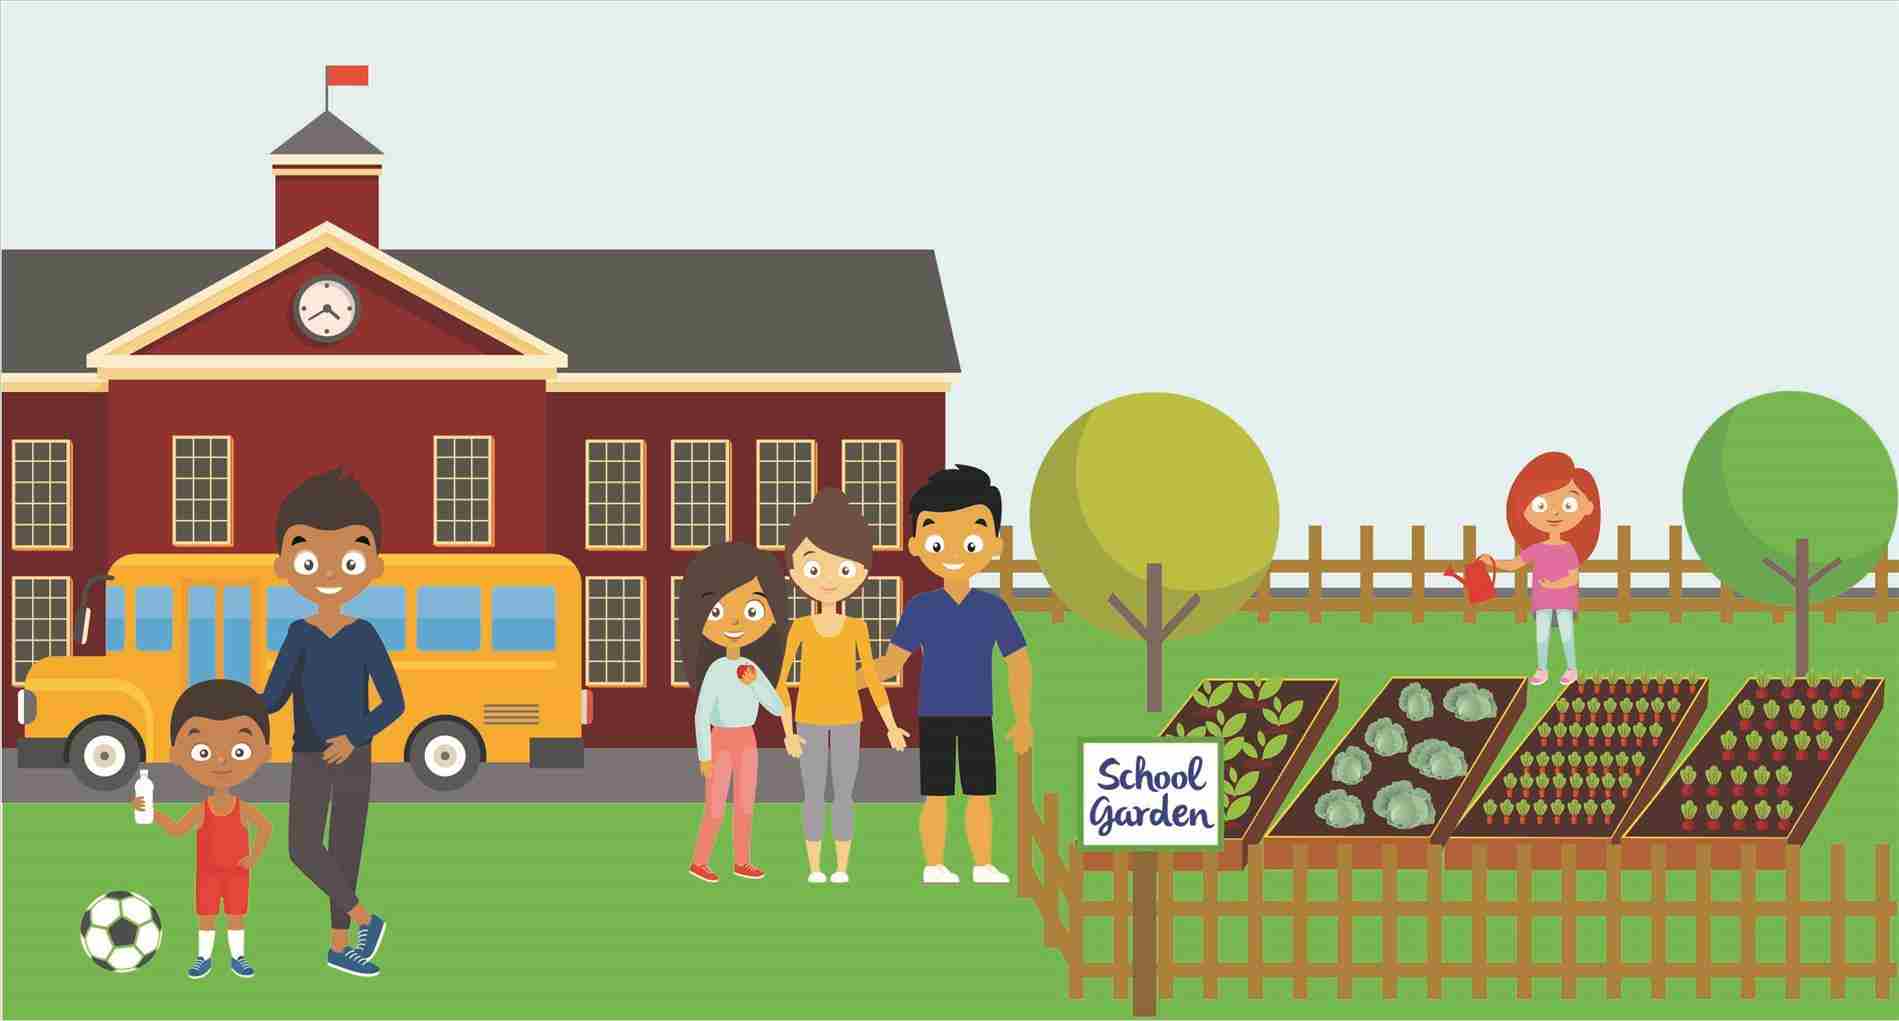 Cartoon image of a school building with students, parents and a garden.